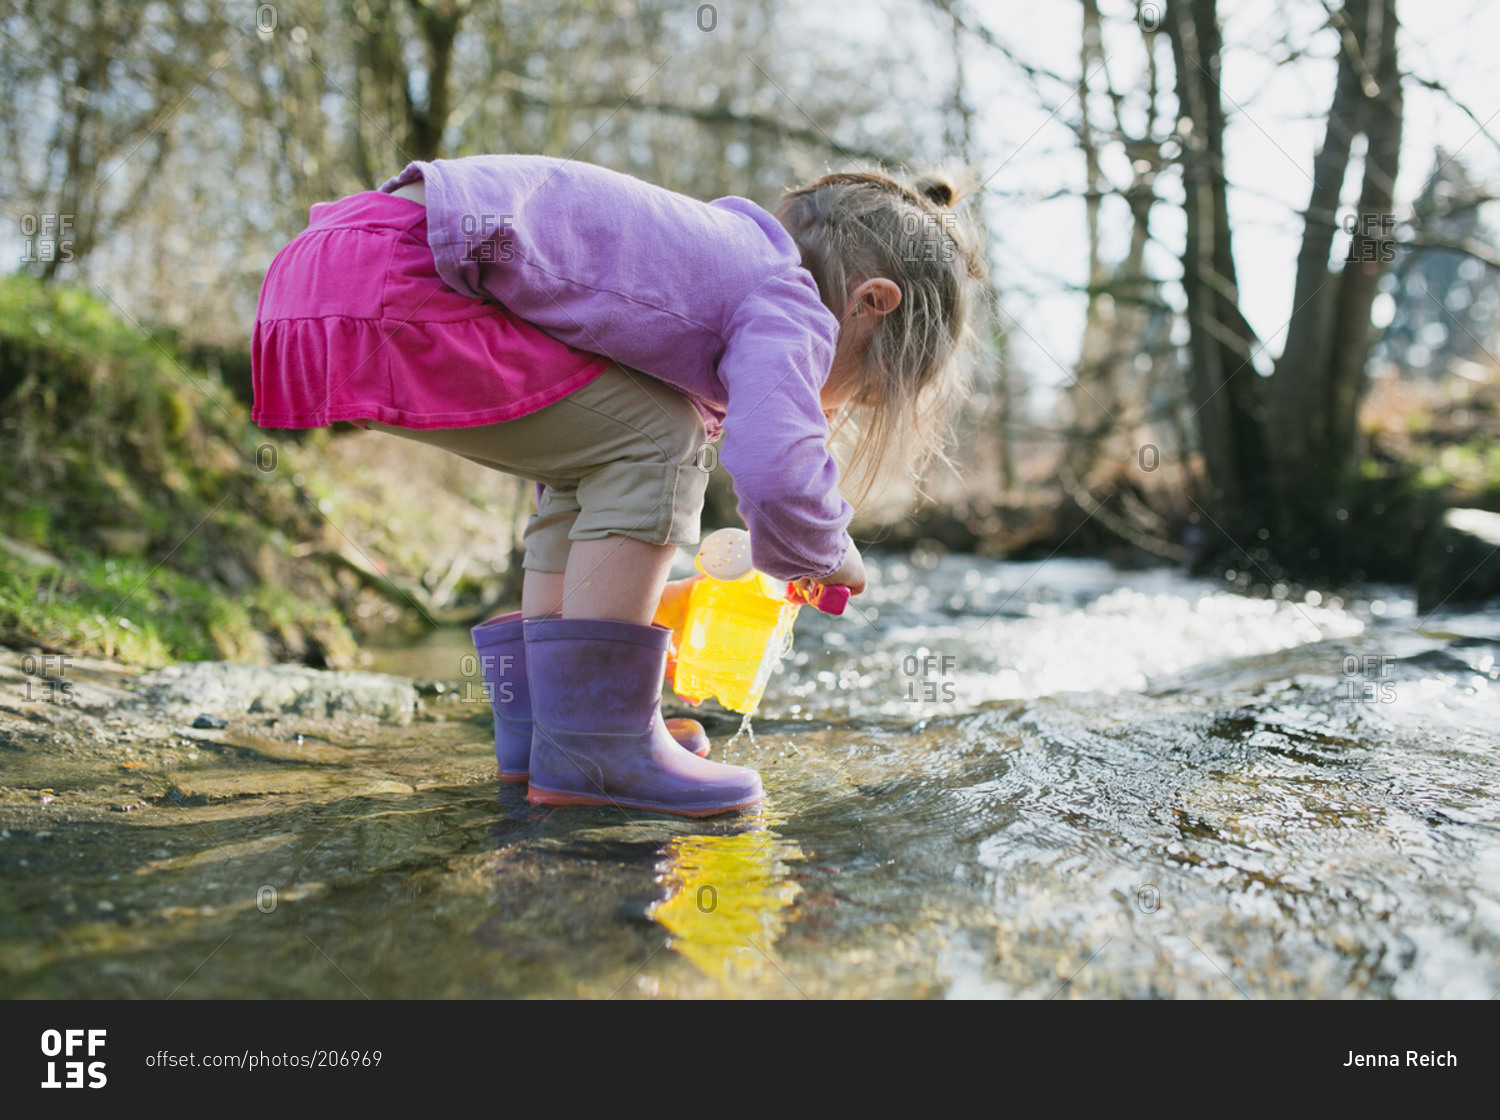 A little girl plays in a stream